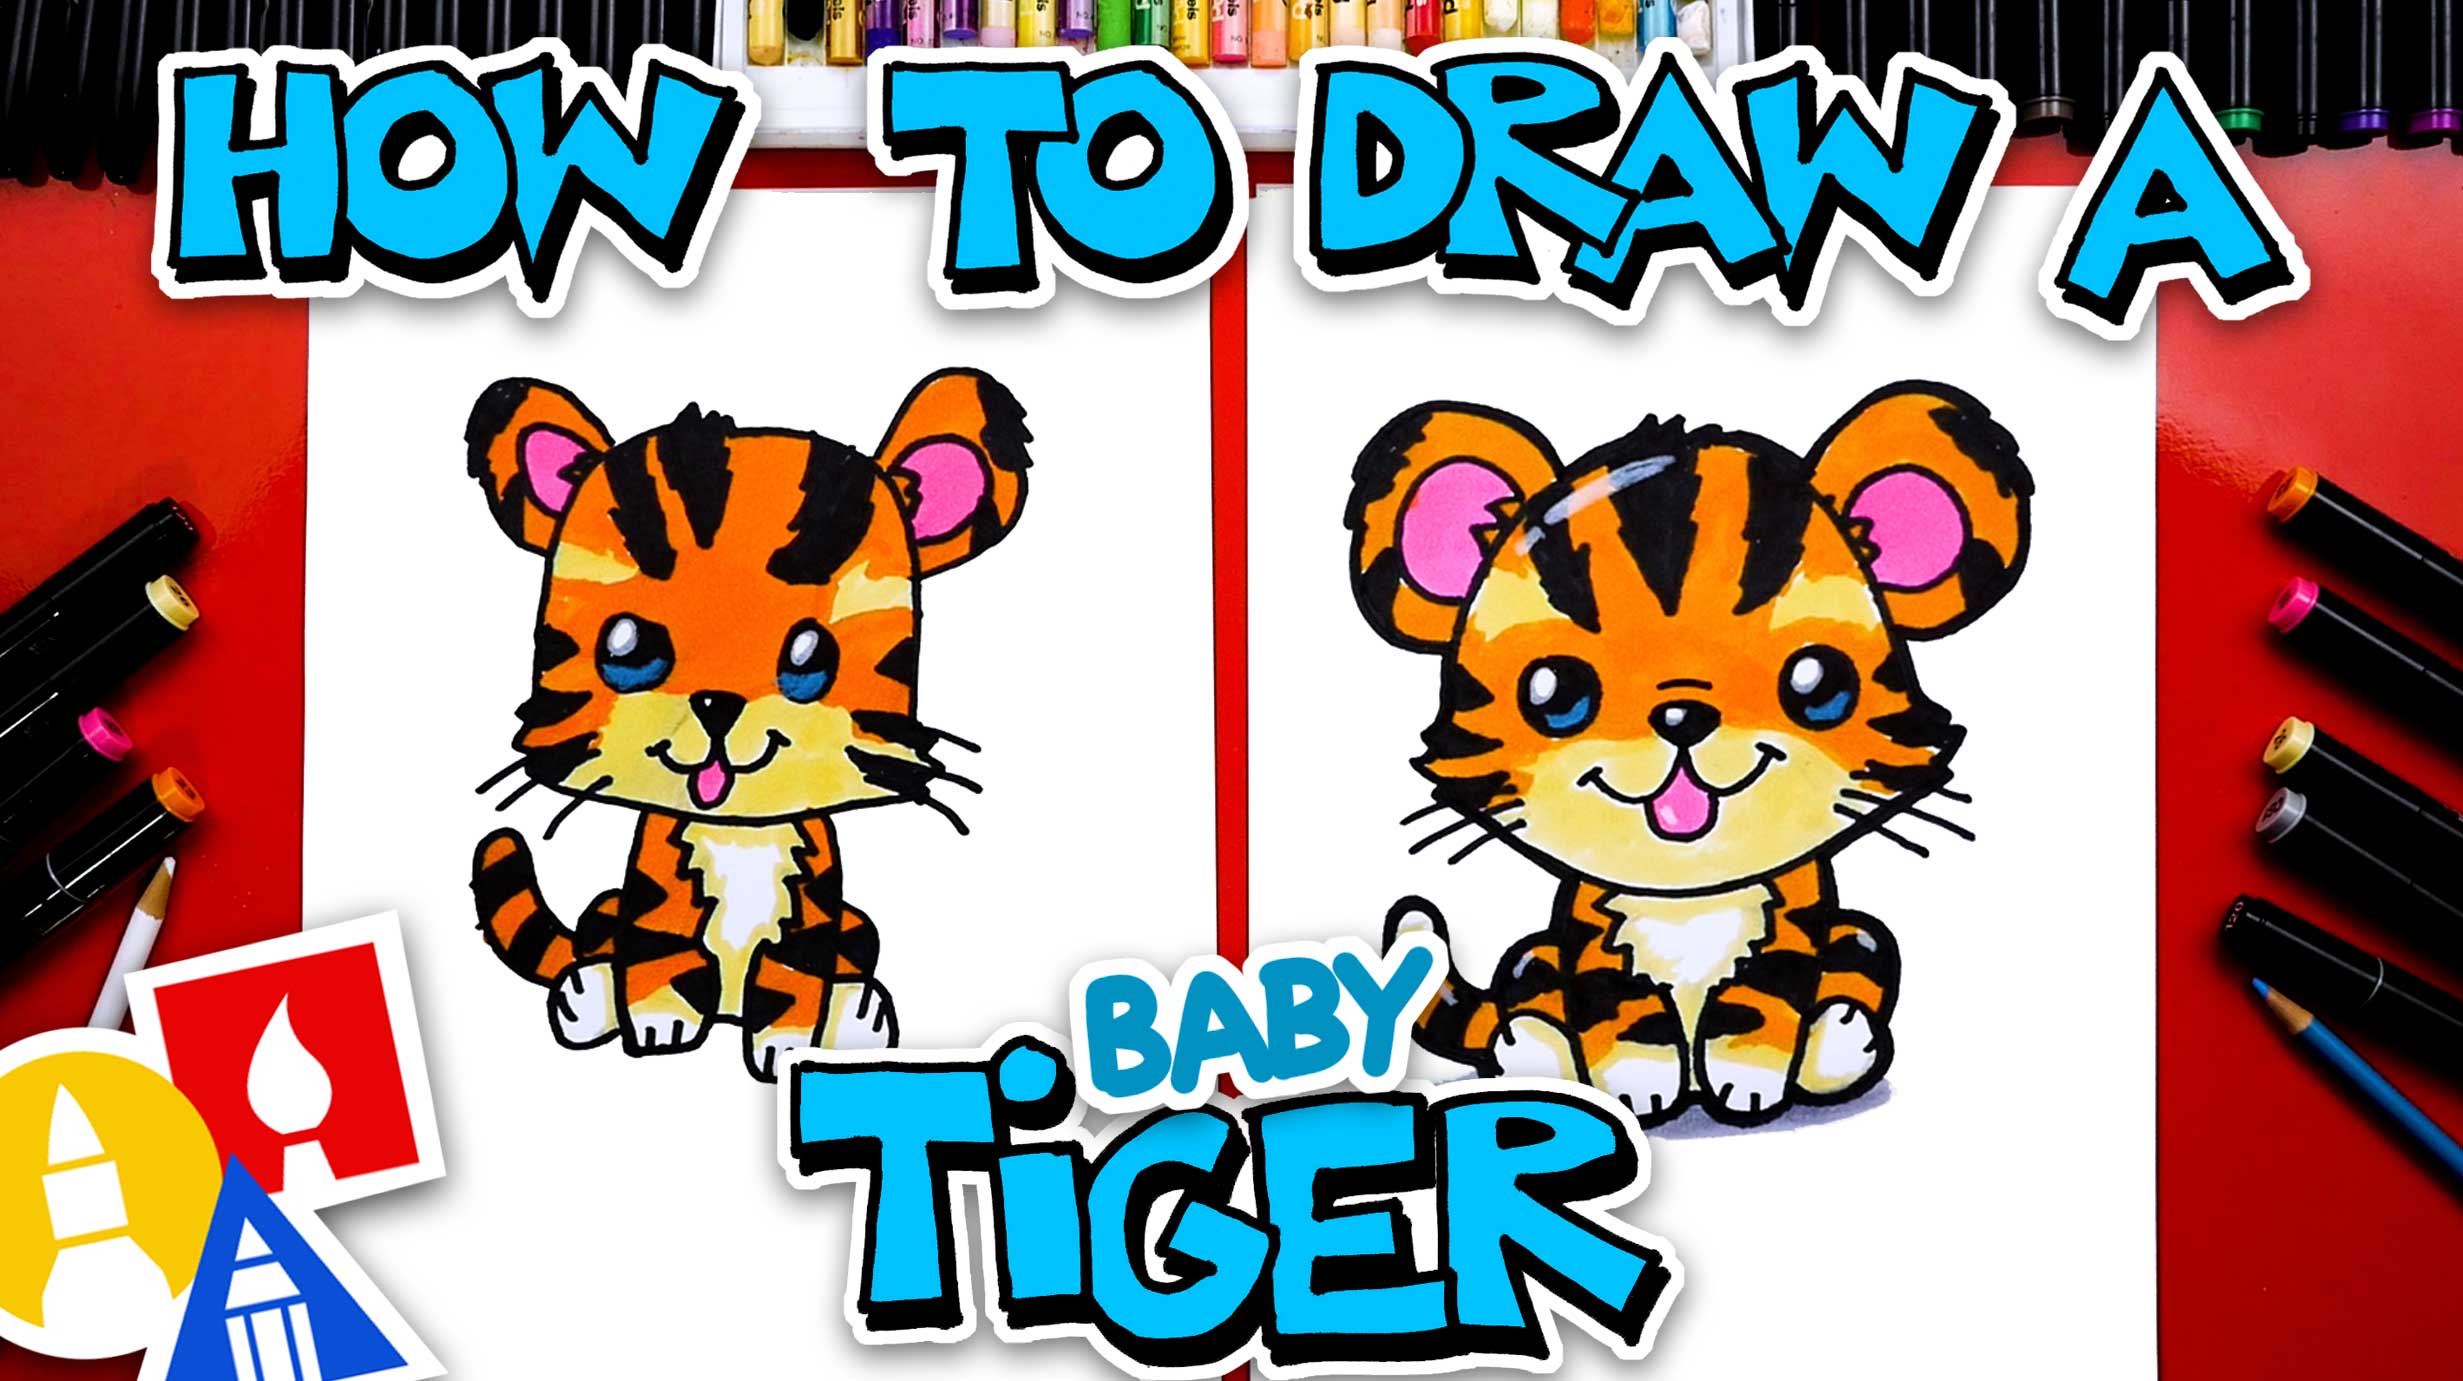 How To Draw A Baby Tiger | Art For Kids Hub